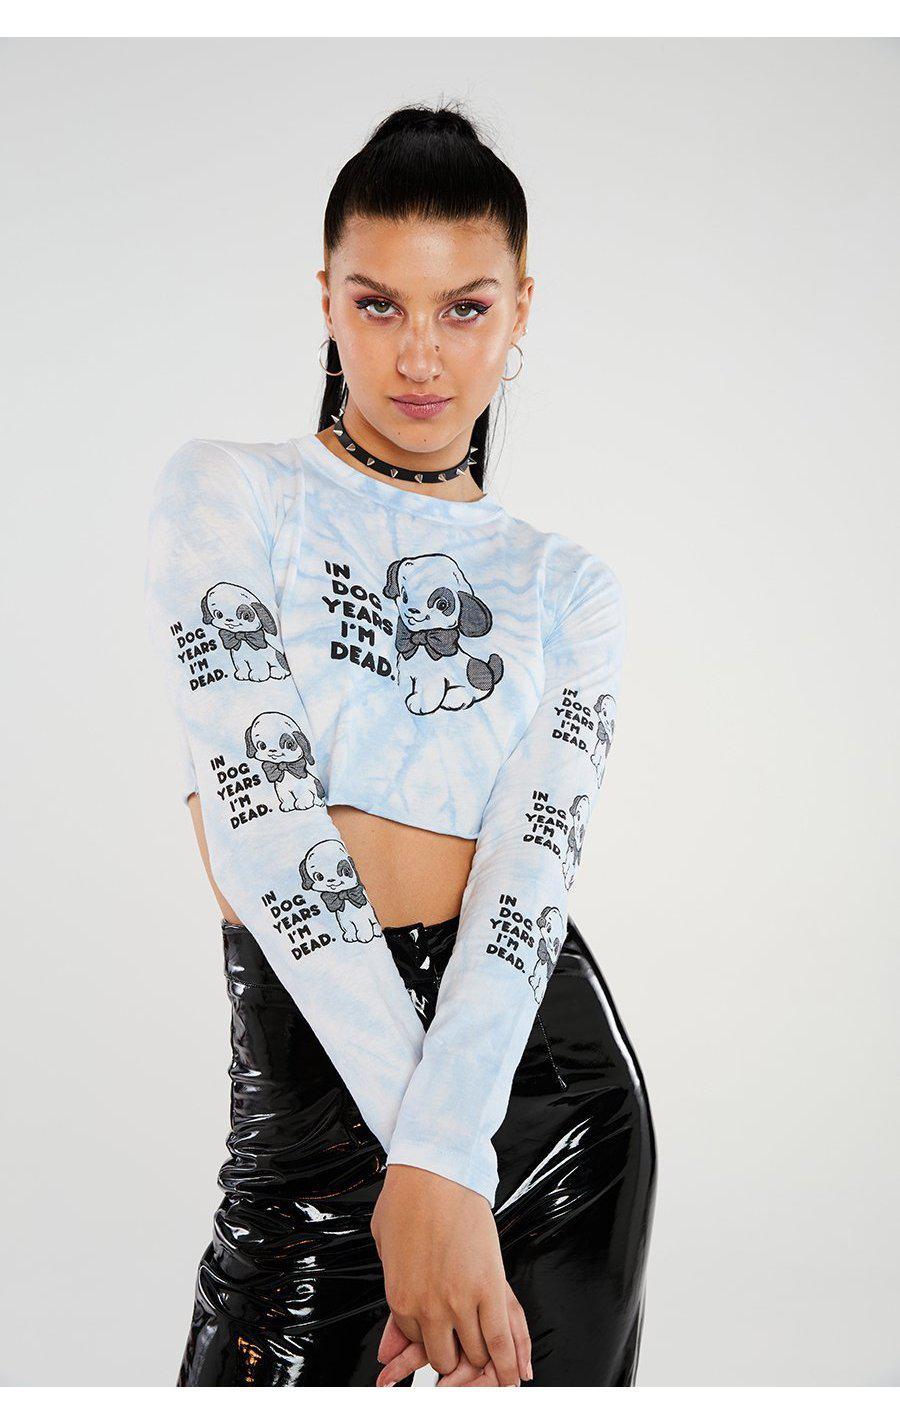 Buy New Girl Order Dog Years Tie Dye Long Sleeved Top at Spoiled Brat  Online - UK online Fashion &amp; lifestyle boutique